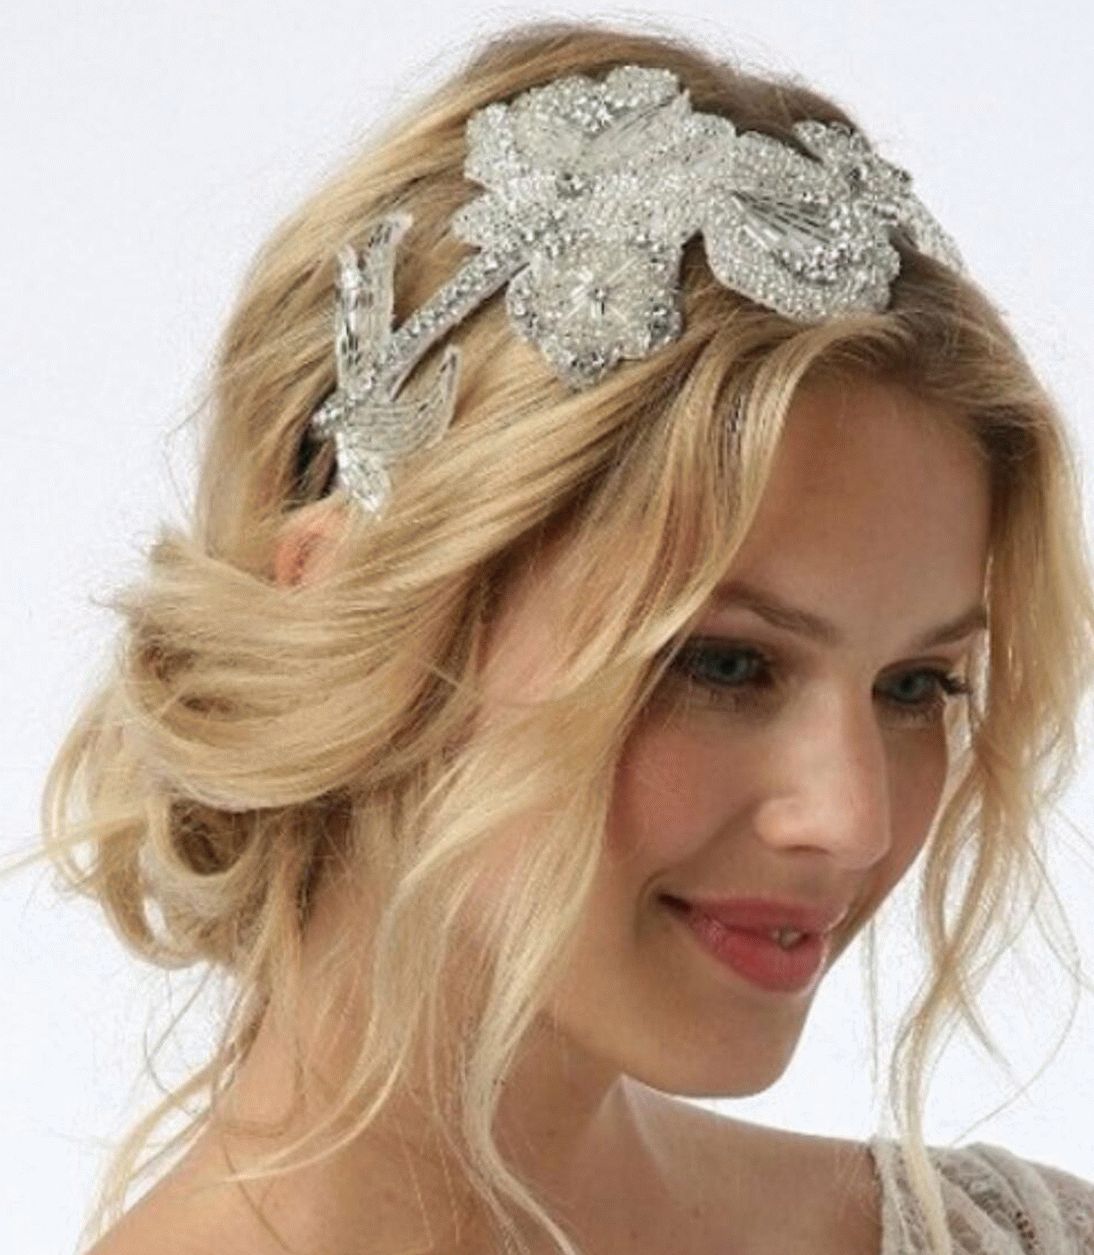 Hair Ornament: New Year Hairstyle